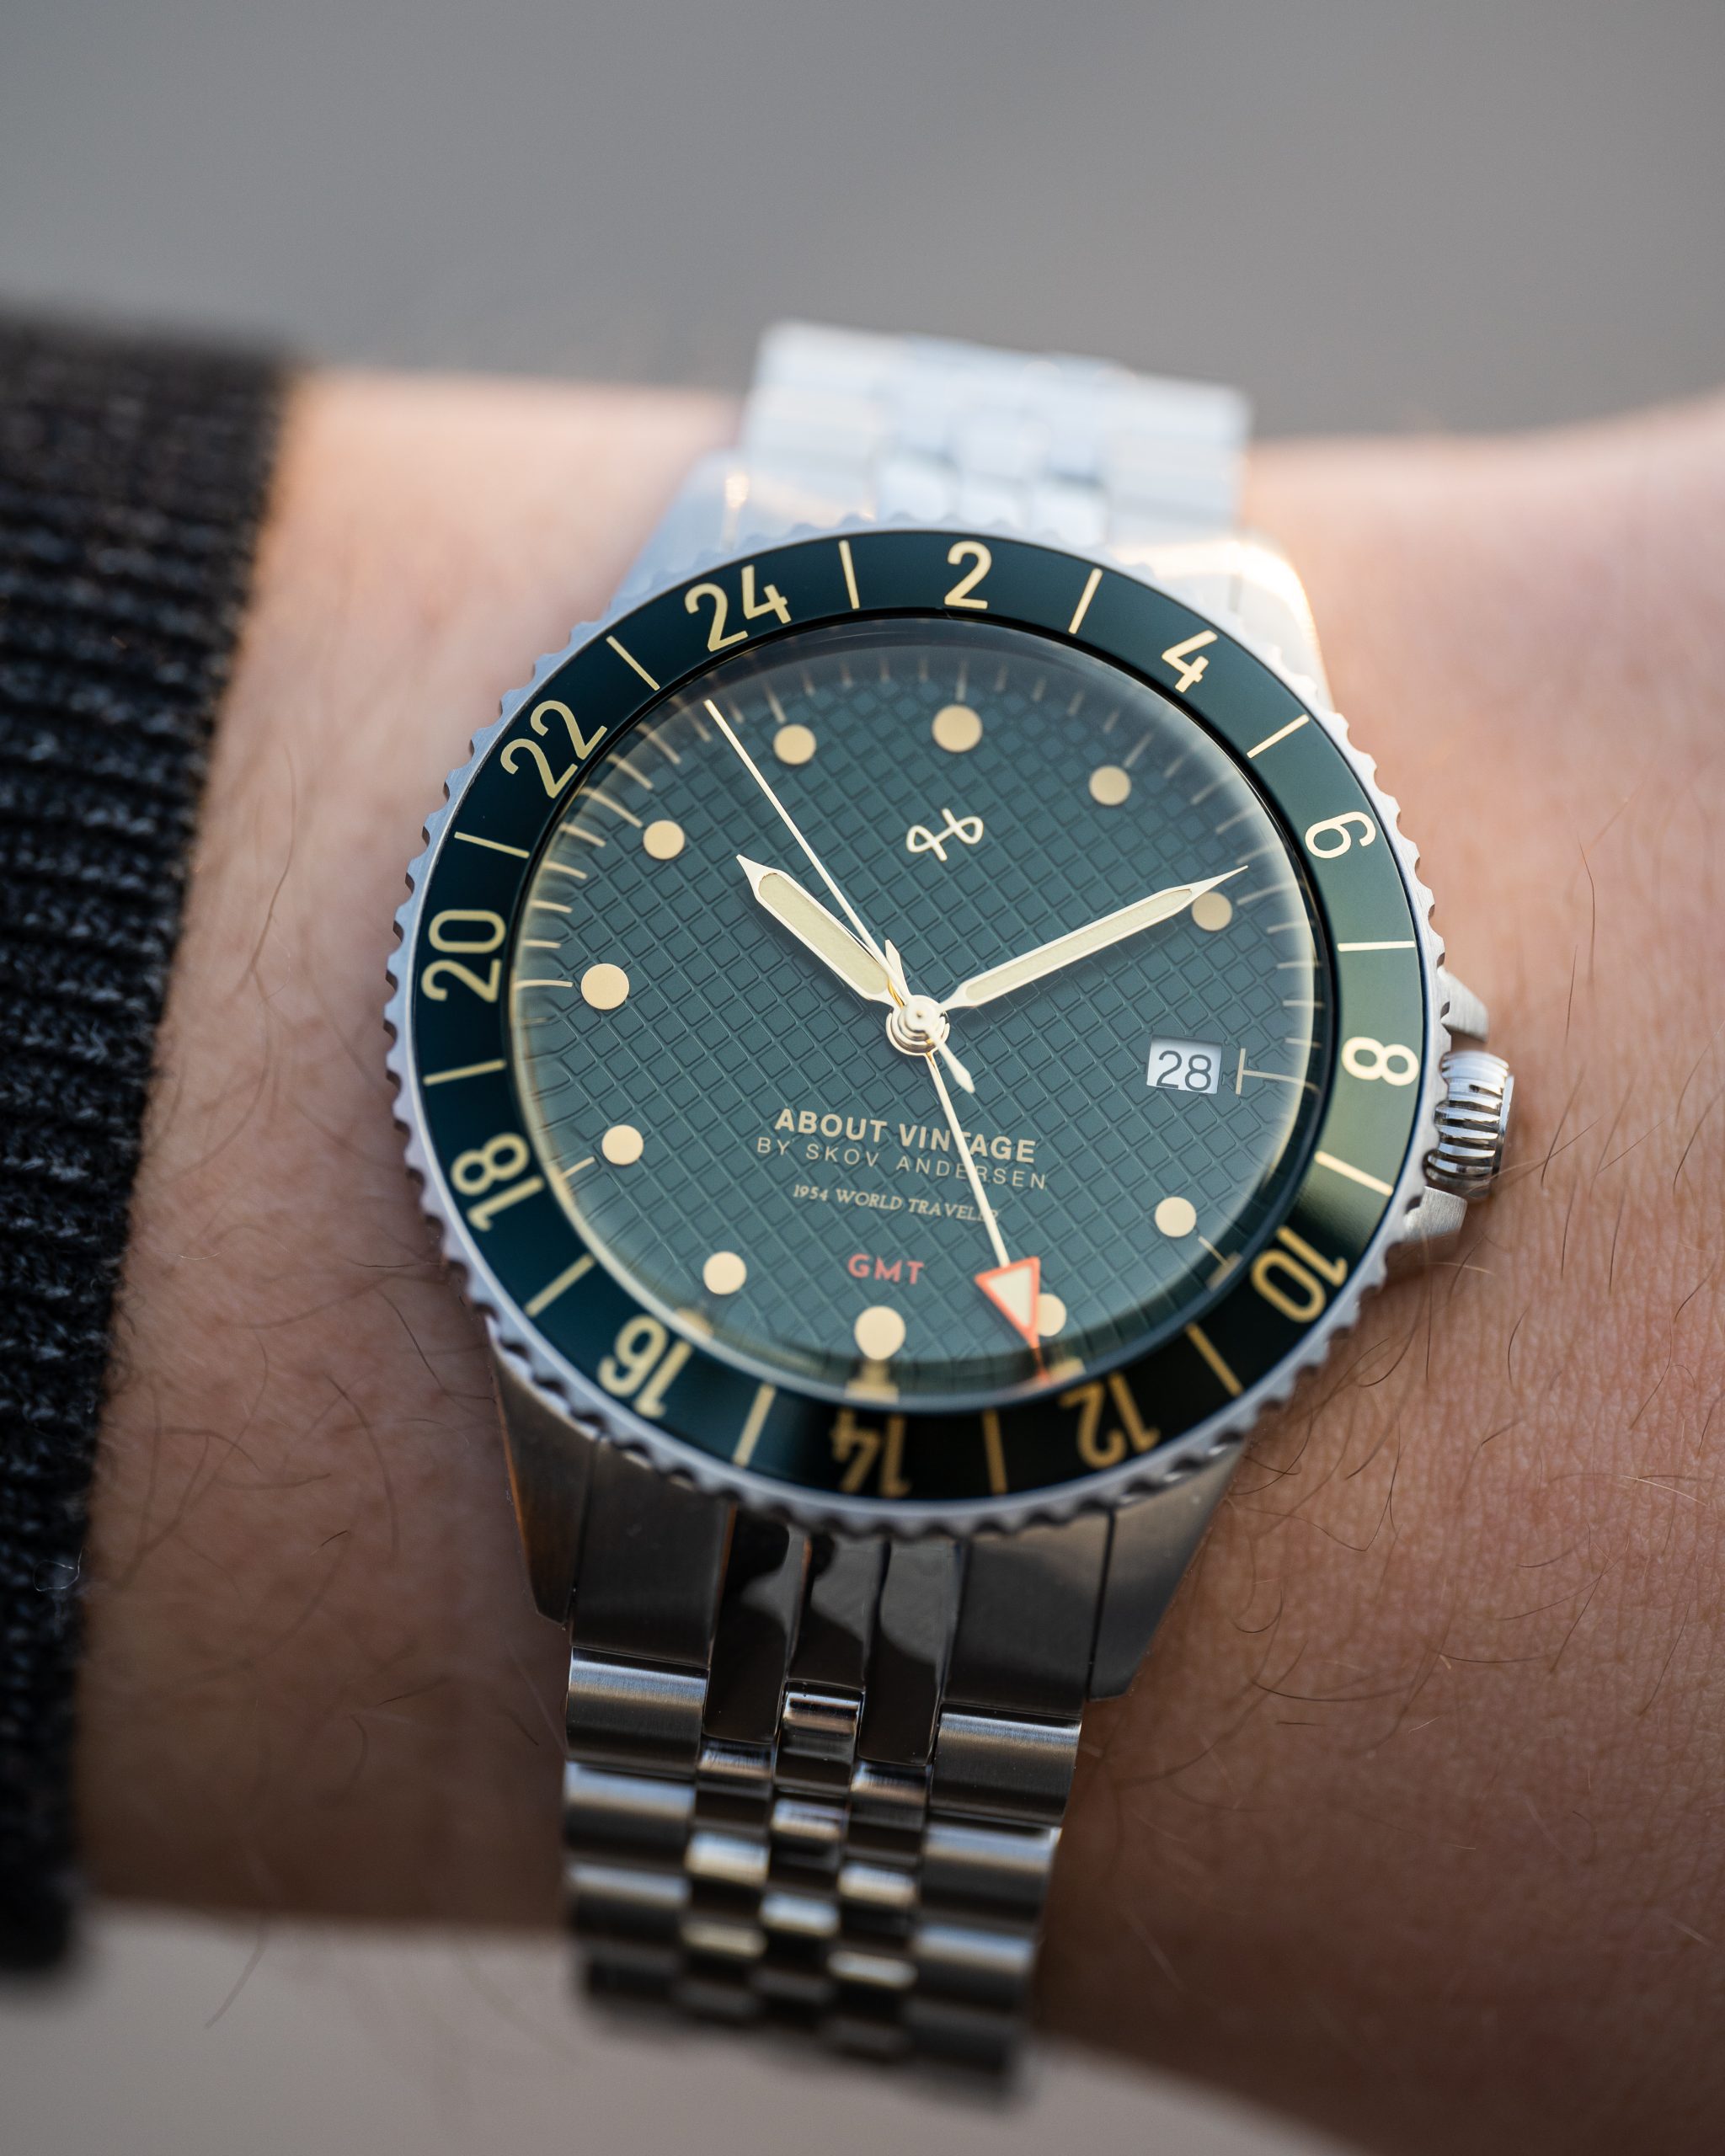 Introducing The About Vintage 1954 World Traveler GMT “Green ...